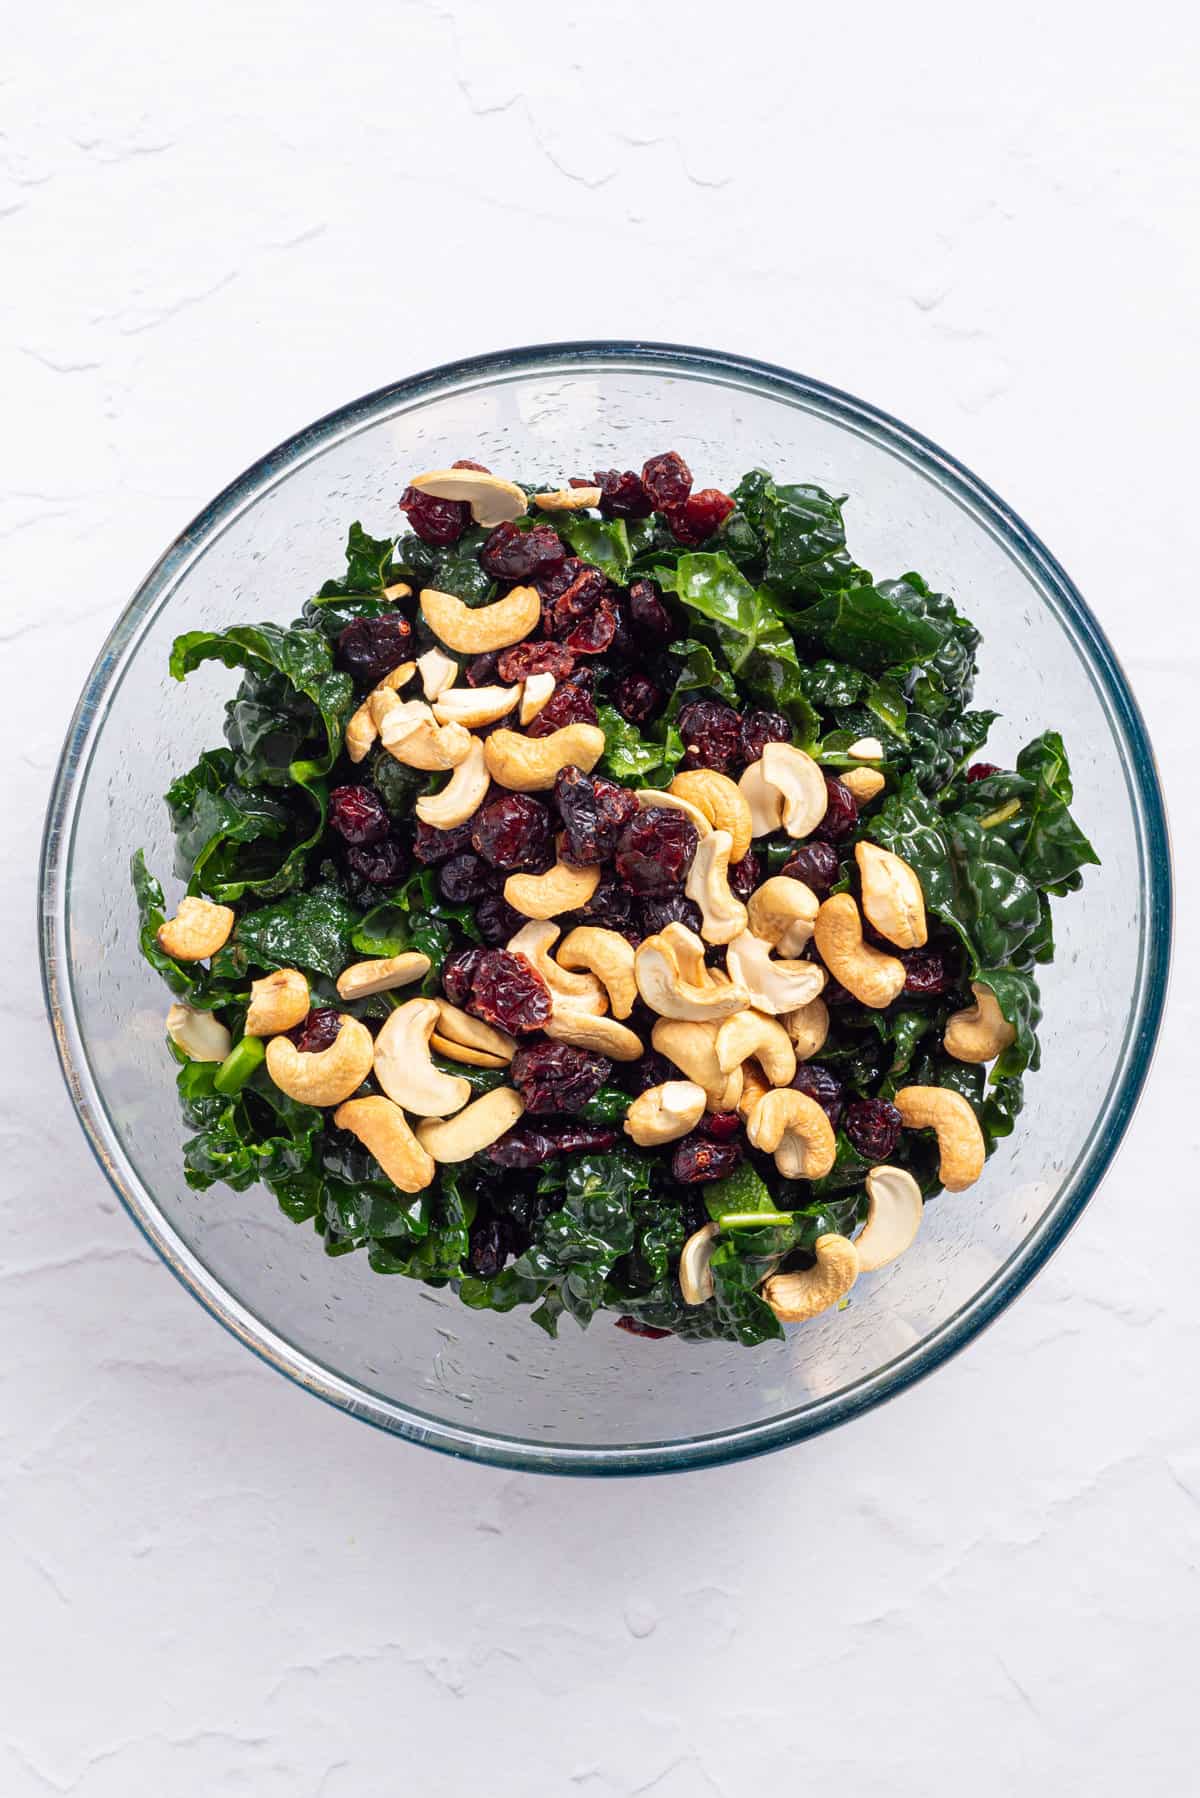 An image of kale leaves, cashews, and dried cranberries with salad dressing tossed in a bowl